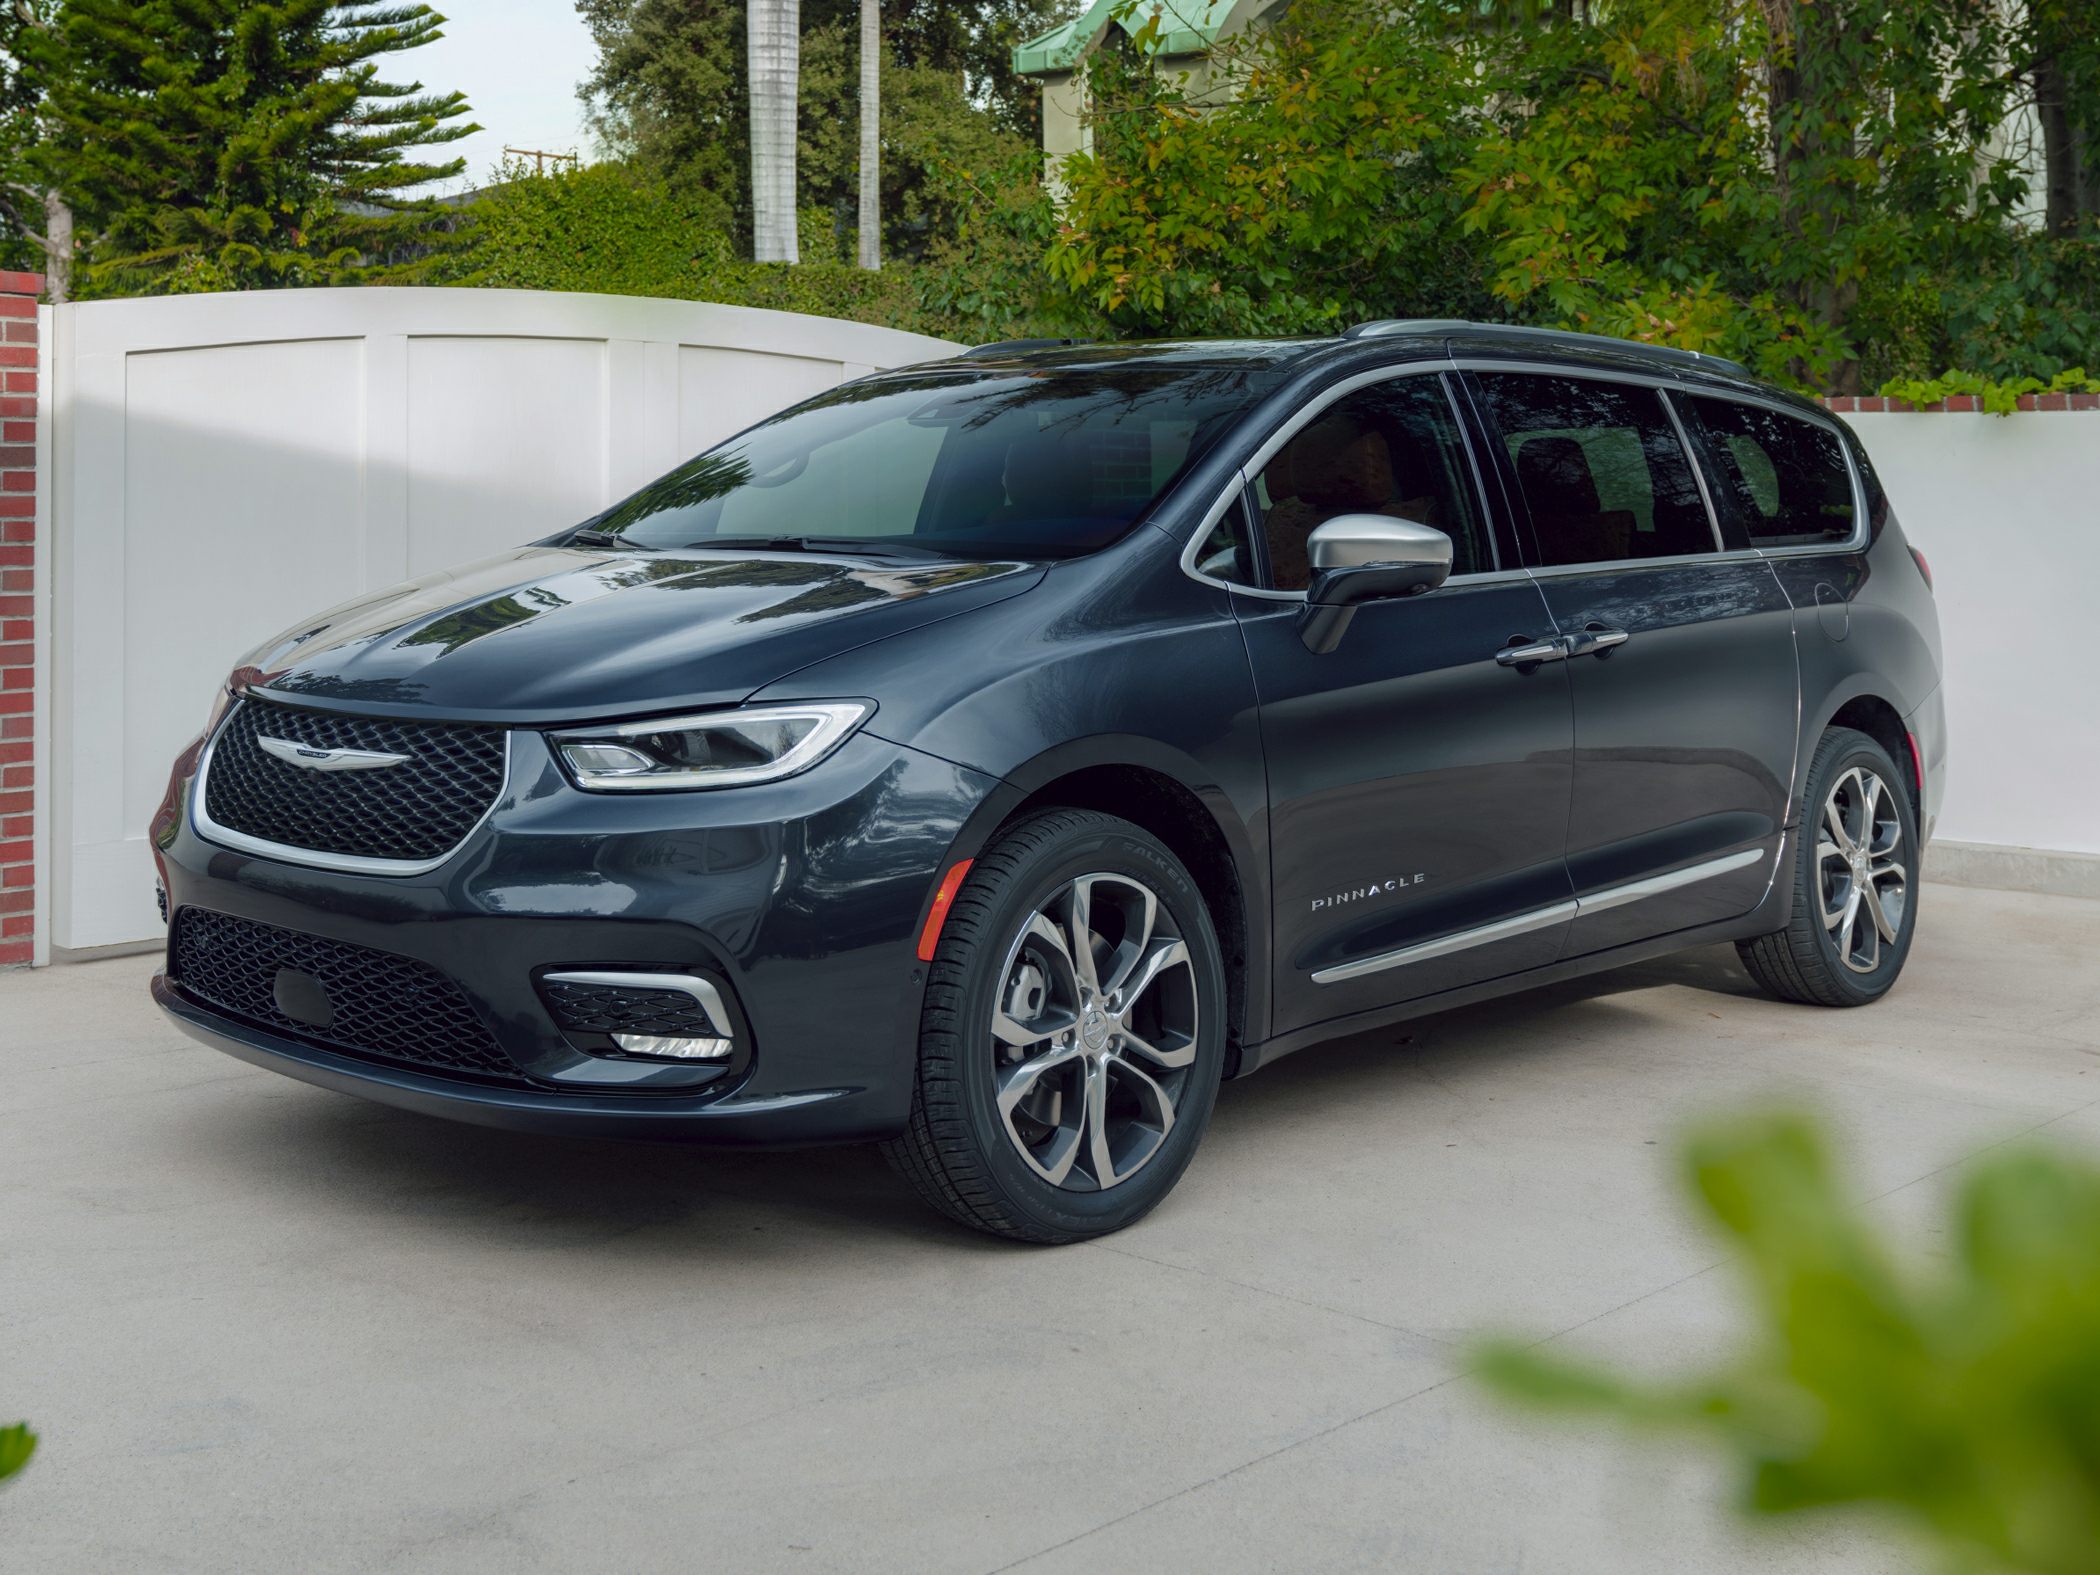 2017 Chrysler Pacifica isn't your parents' Town & Country